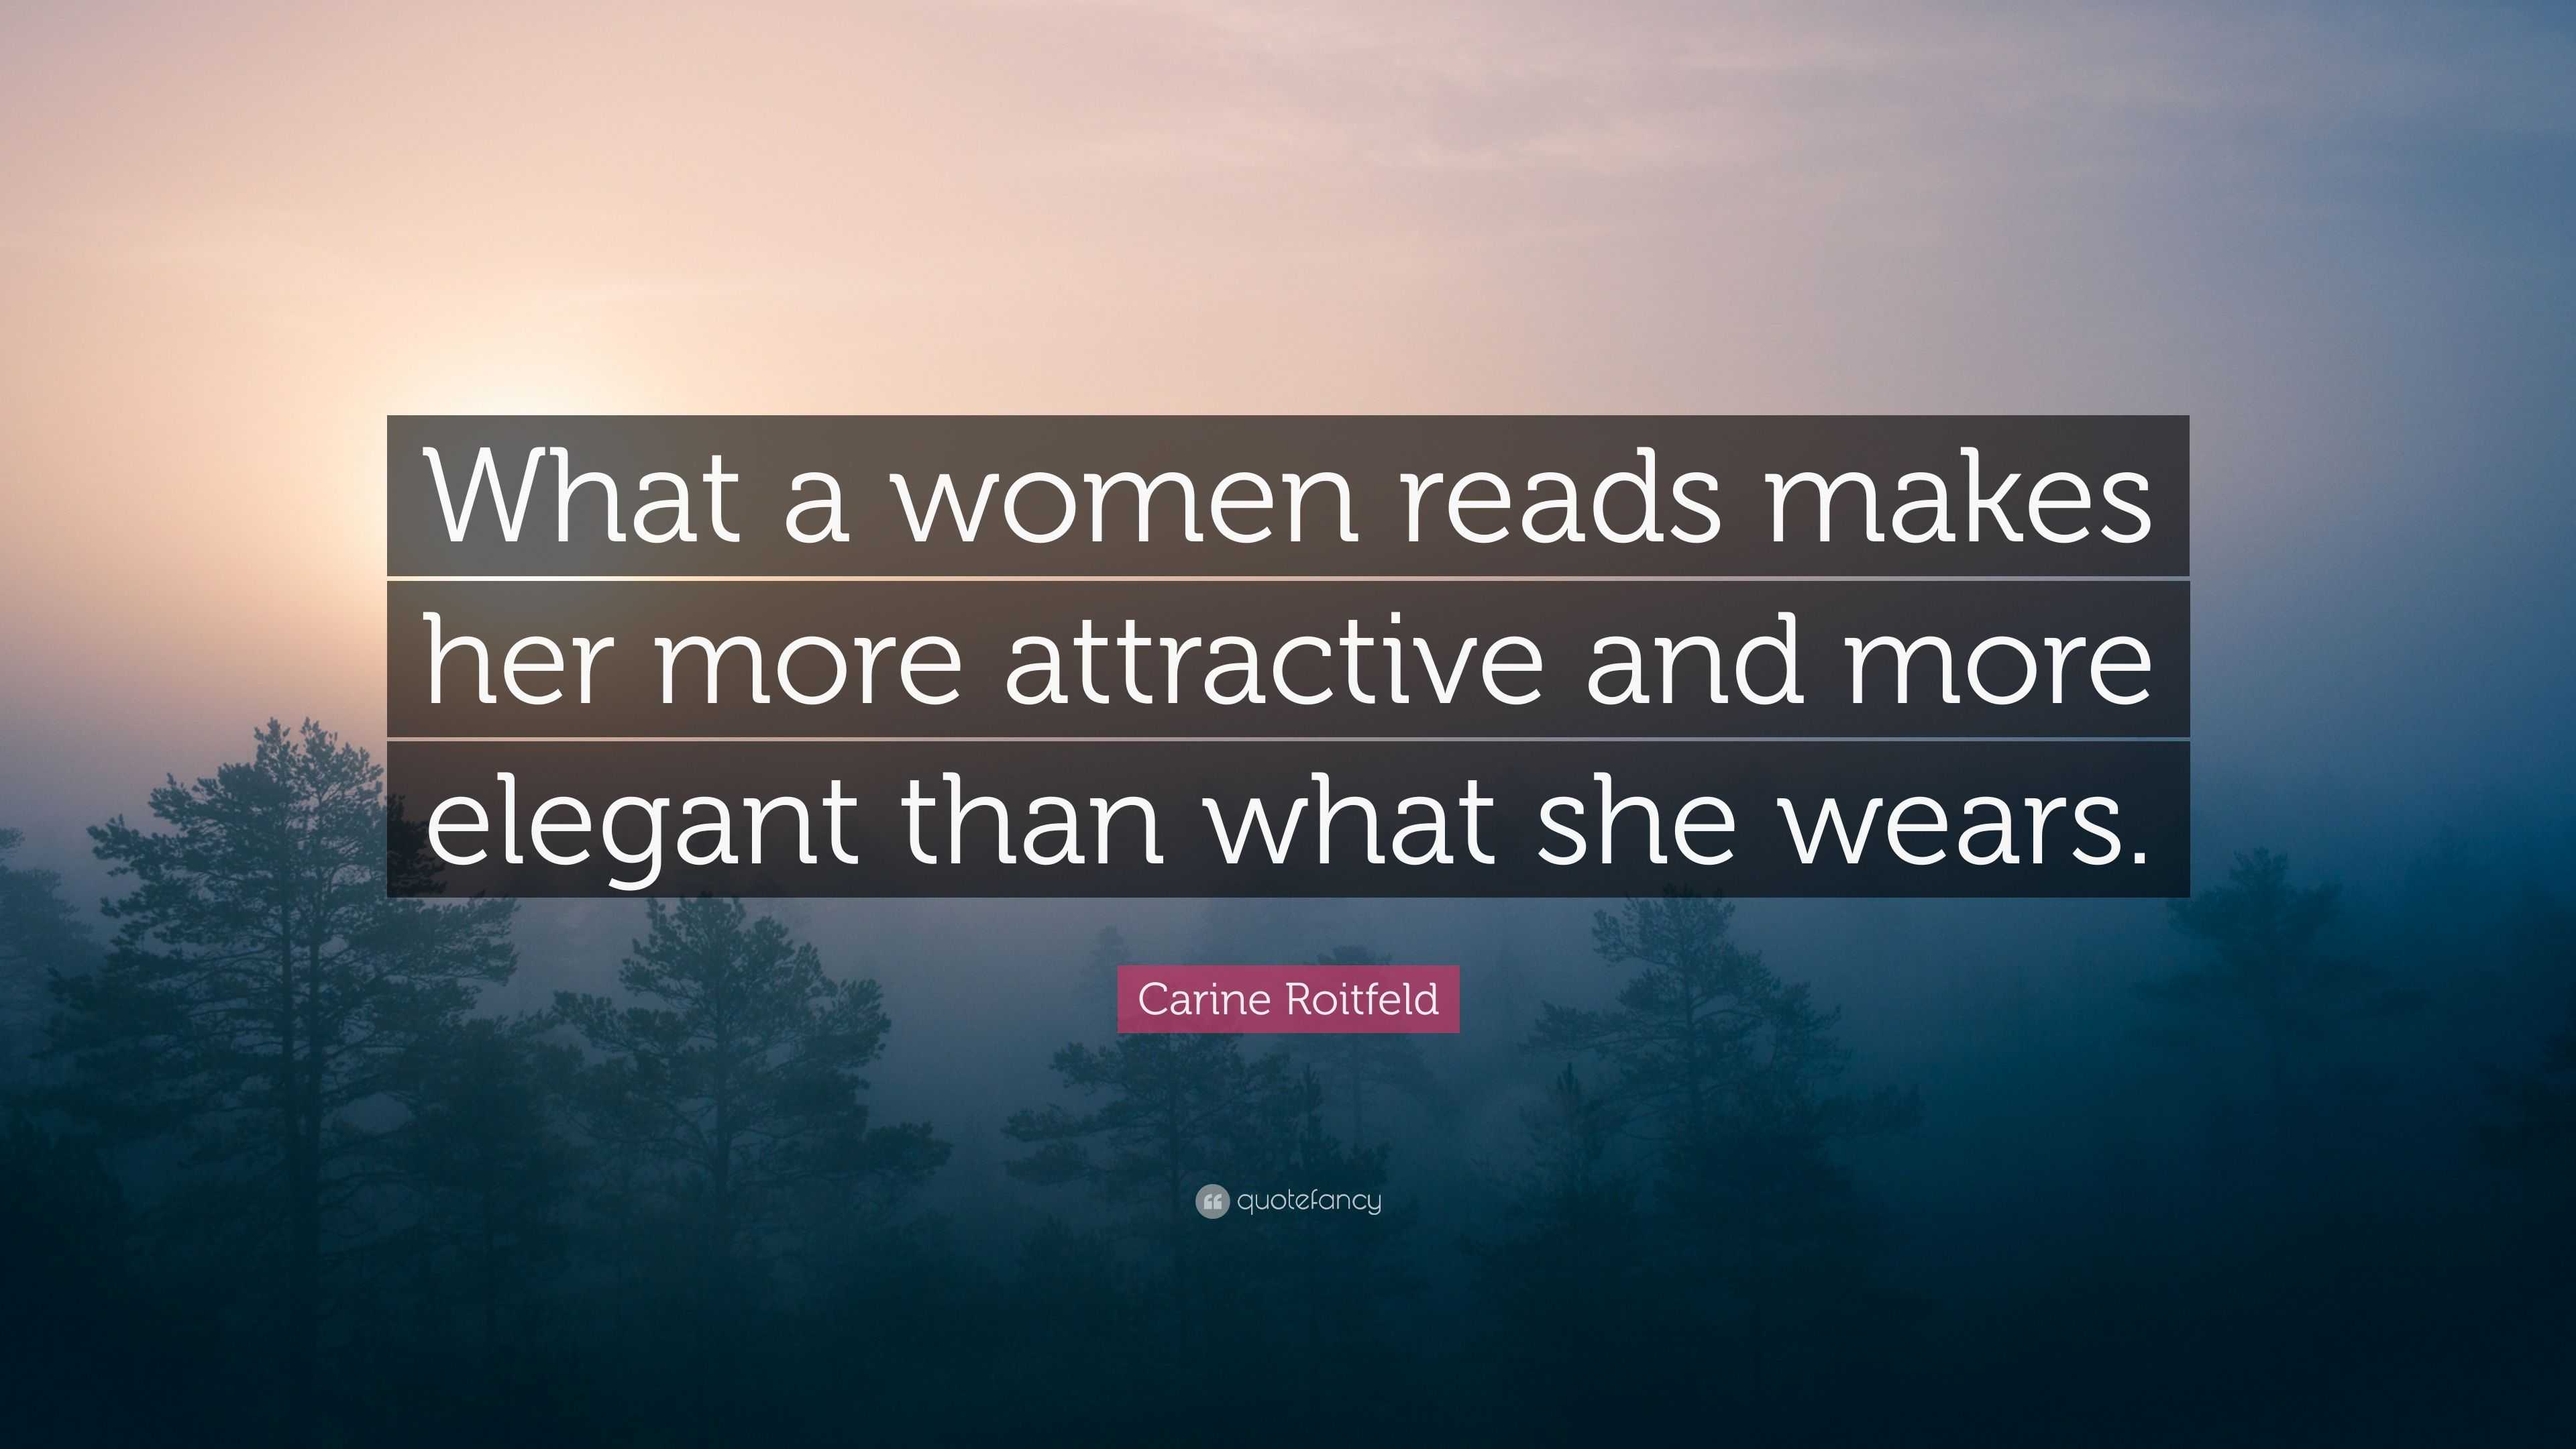 Carine Roitfeld Quote: “What a women reads makes her more attractive ...